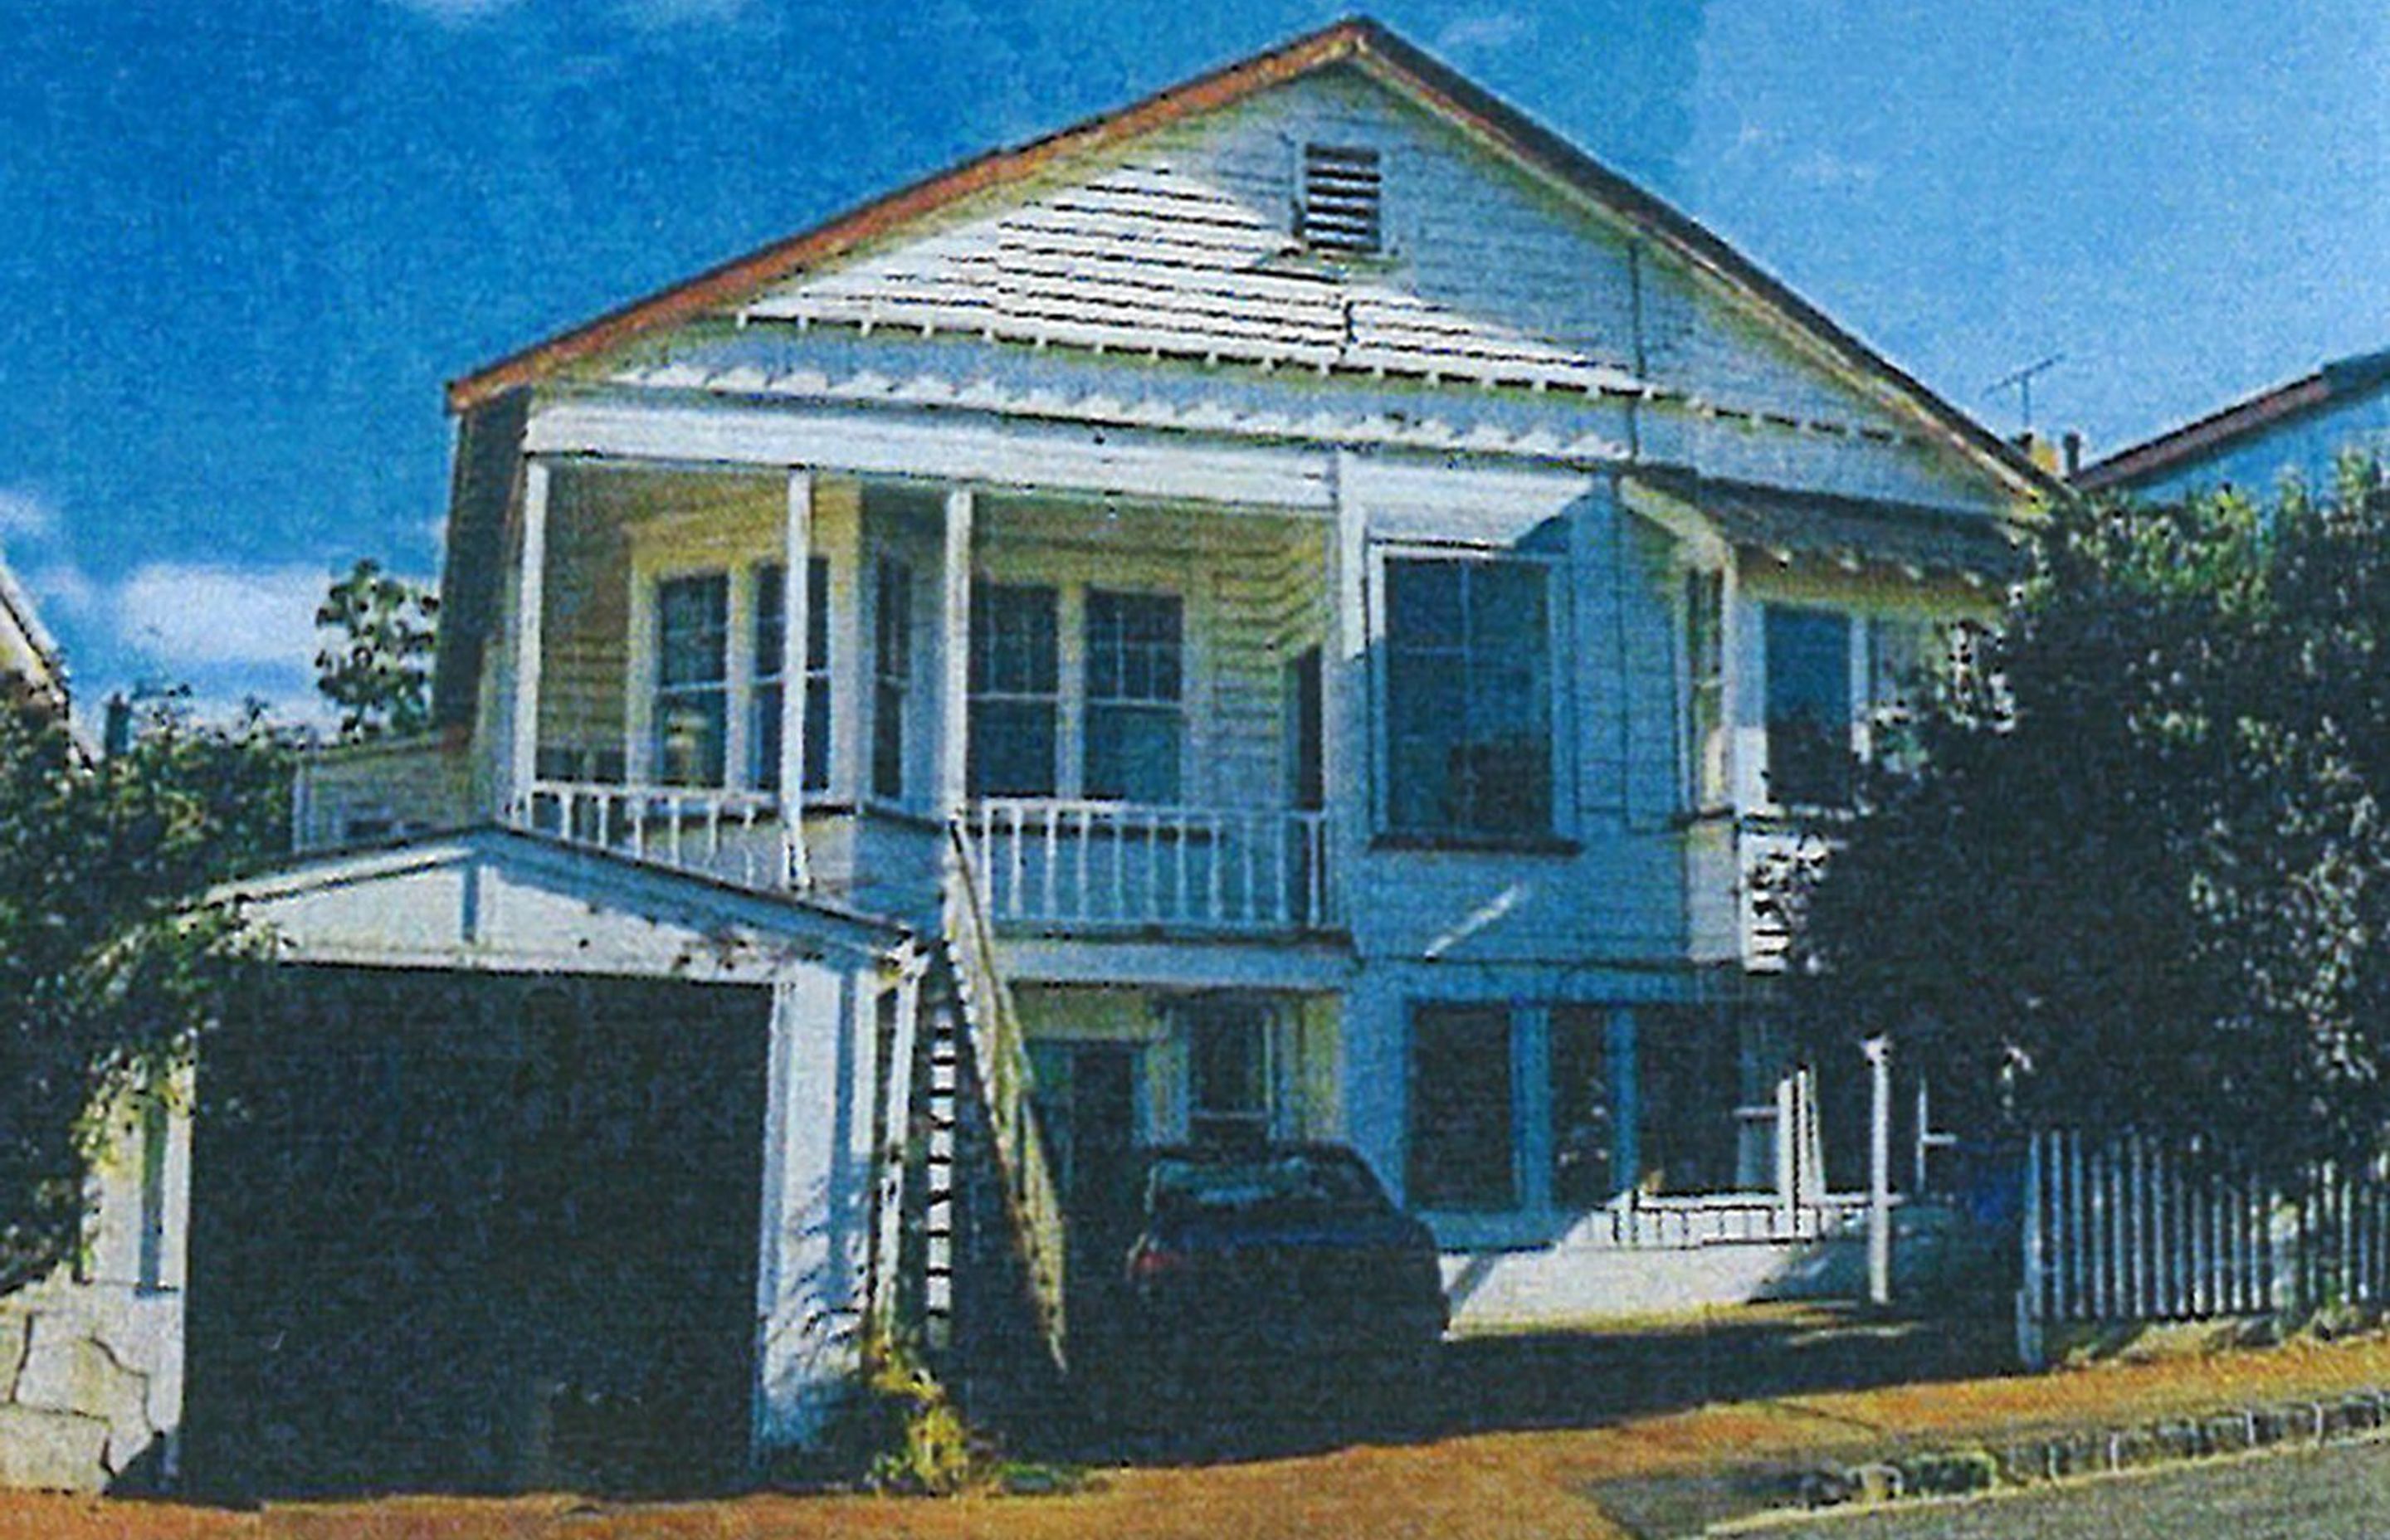 An historic photograph of the house taken during the 1970s gives an indication of the original design of the house.